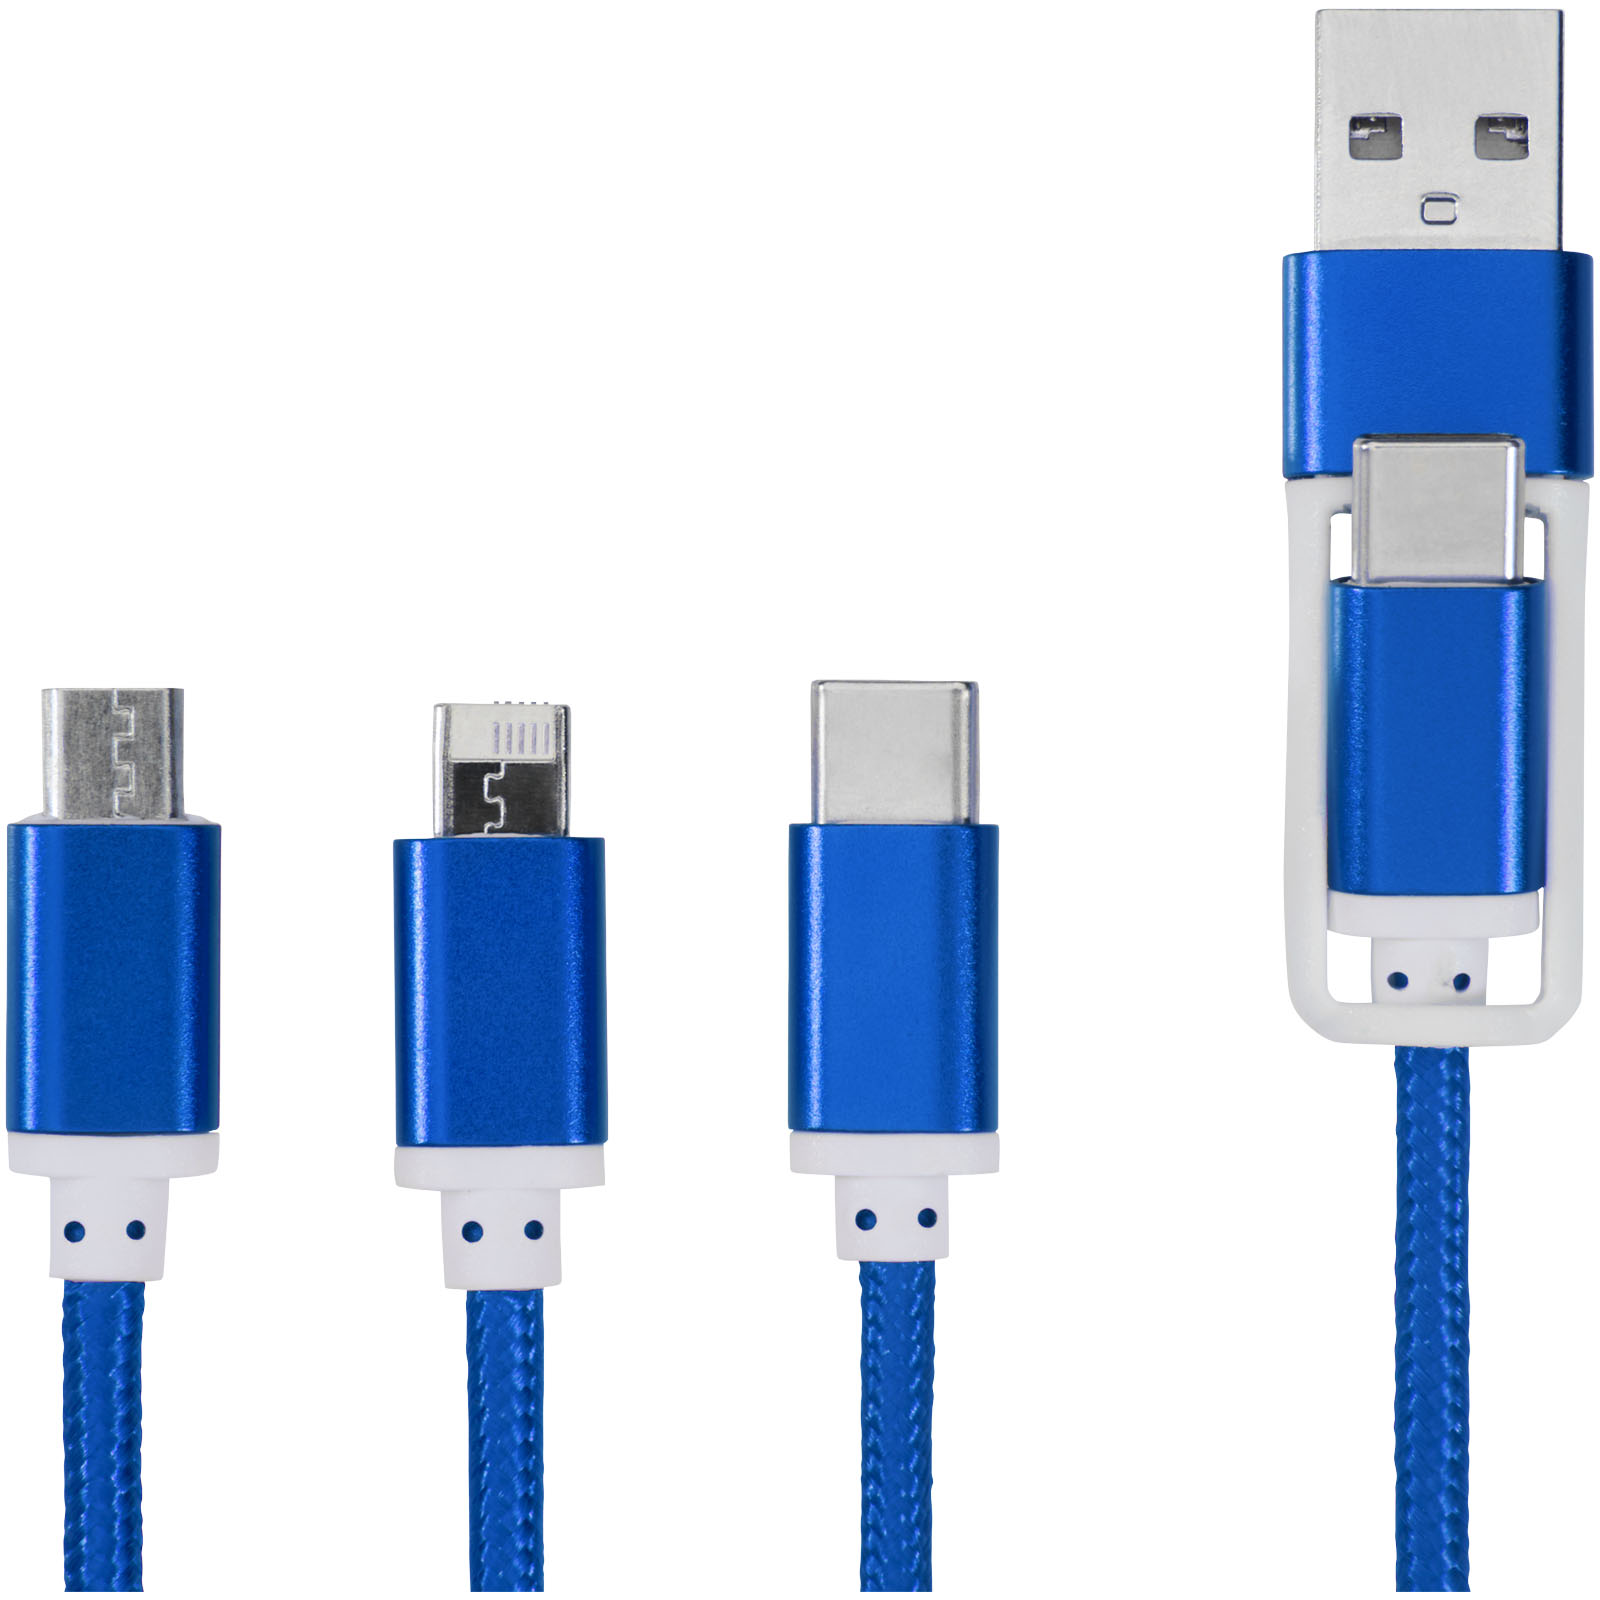 Advertising Cables - Versatile 5-in-1 charging cable - 3